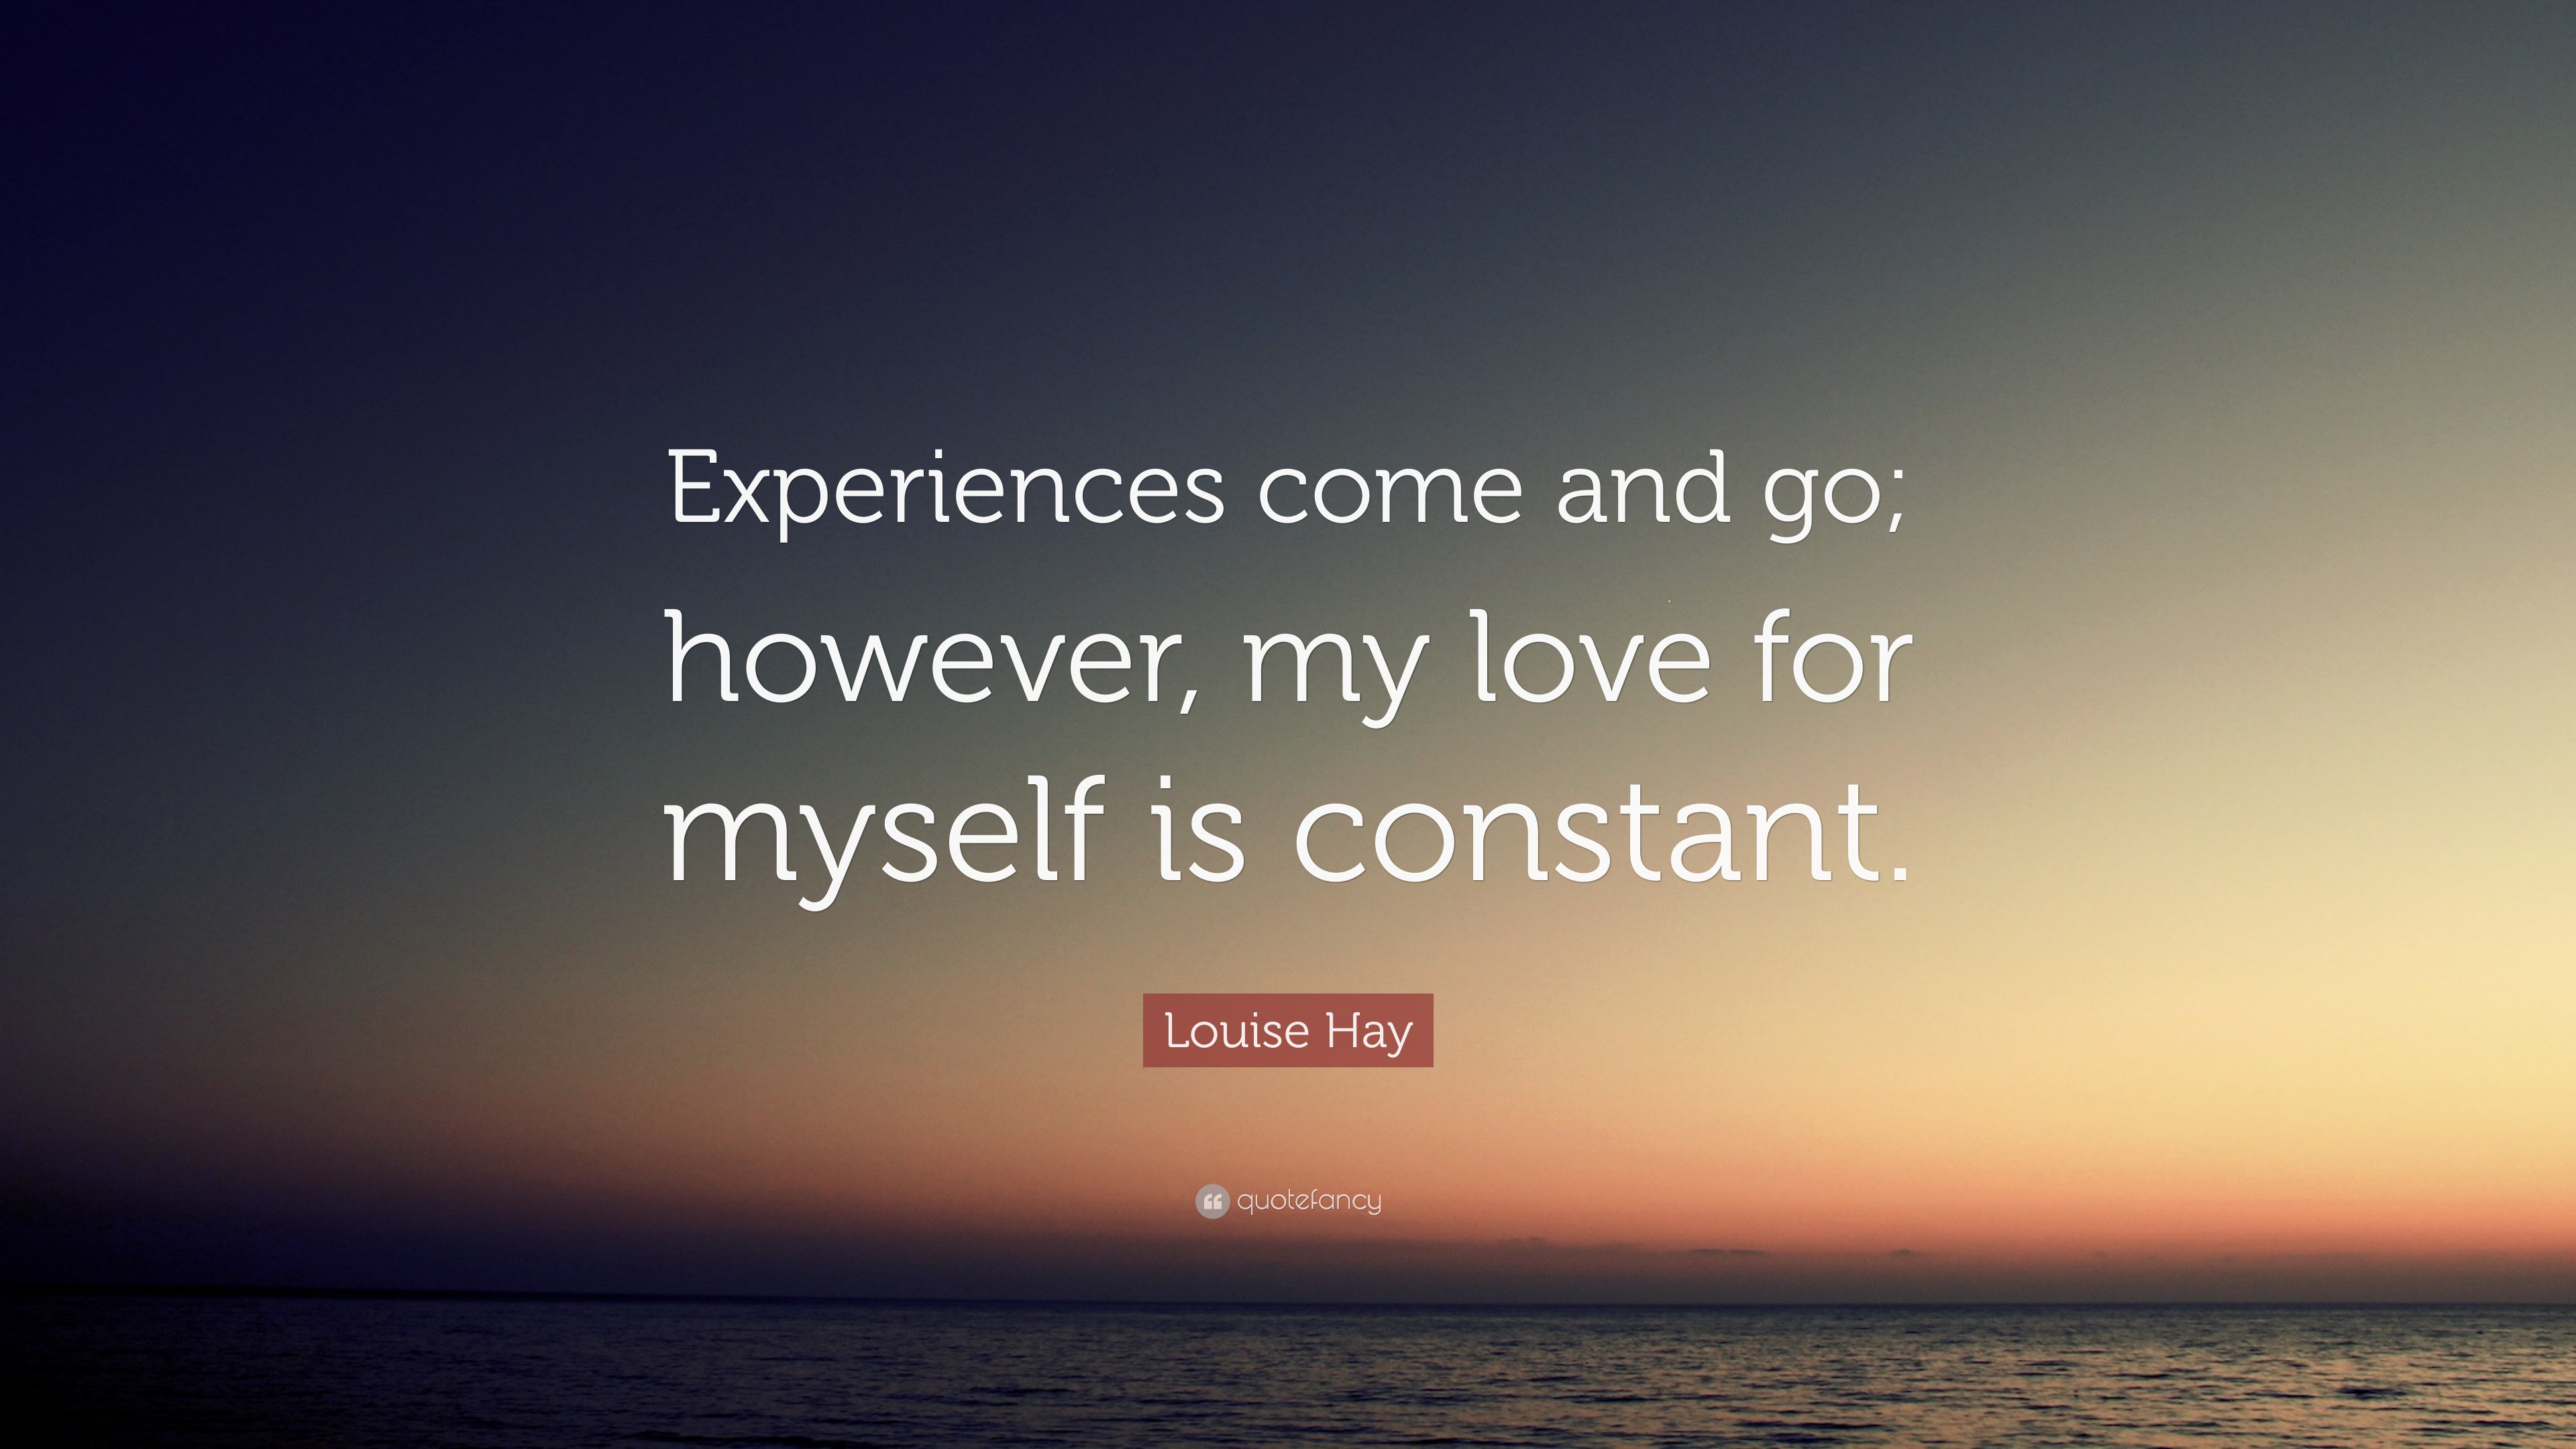 Louise Hay Quote: “Experiences come and go; however, my love for myself ...